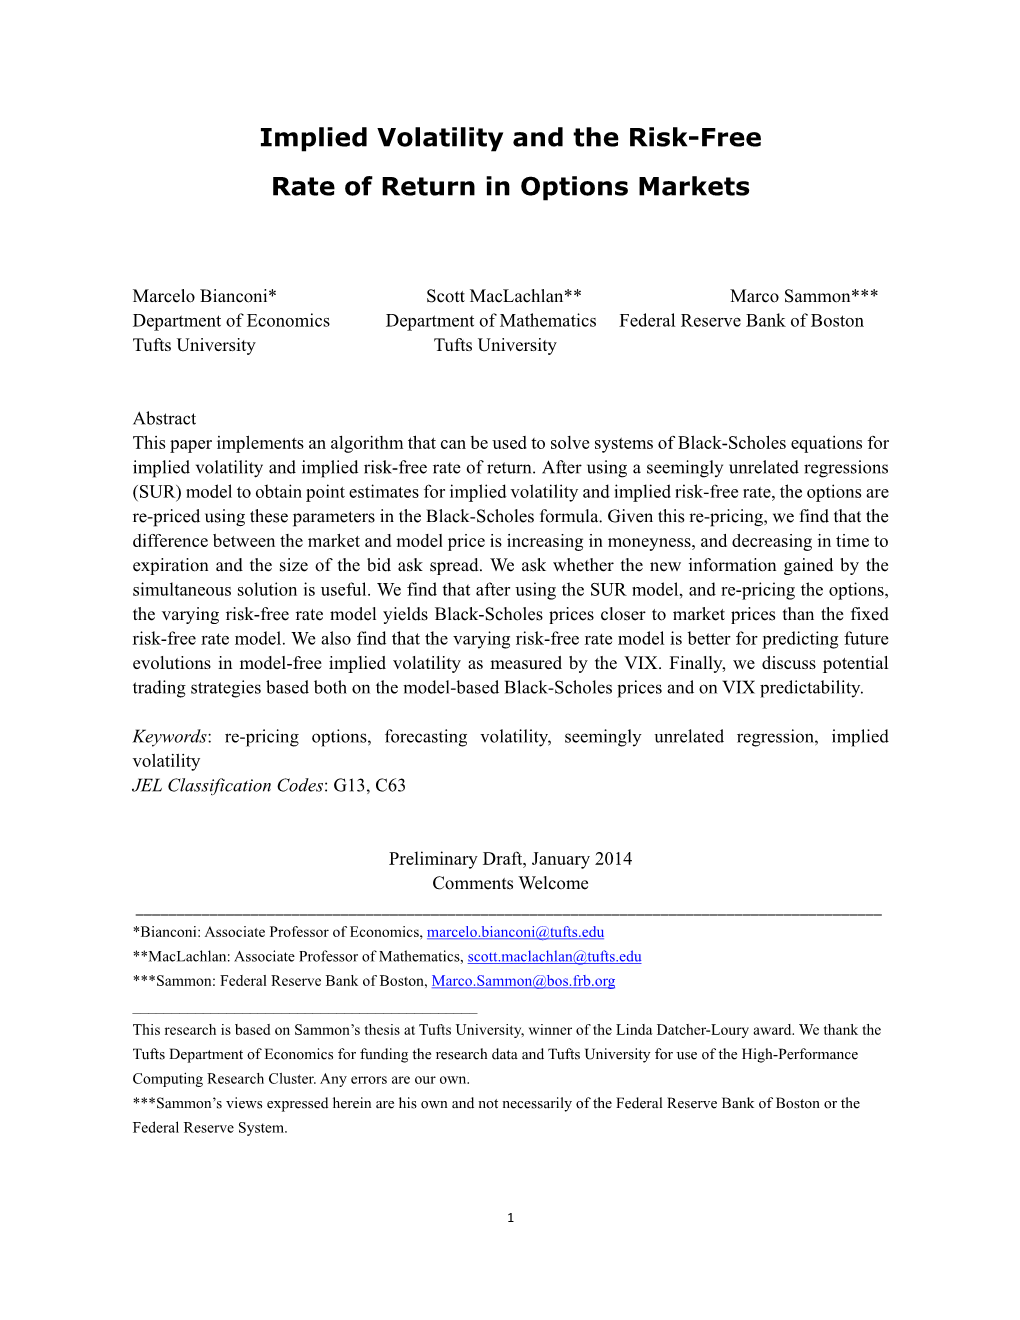 Implied Volatility and the Risk-Free Rate of Return in Options Markets